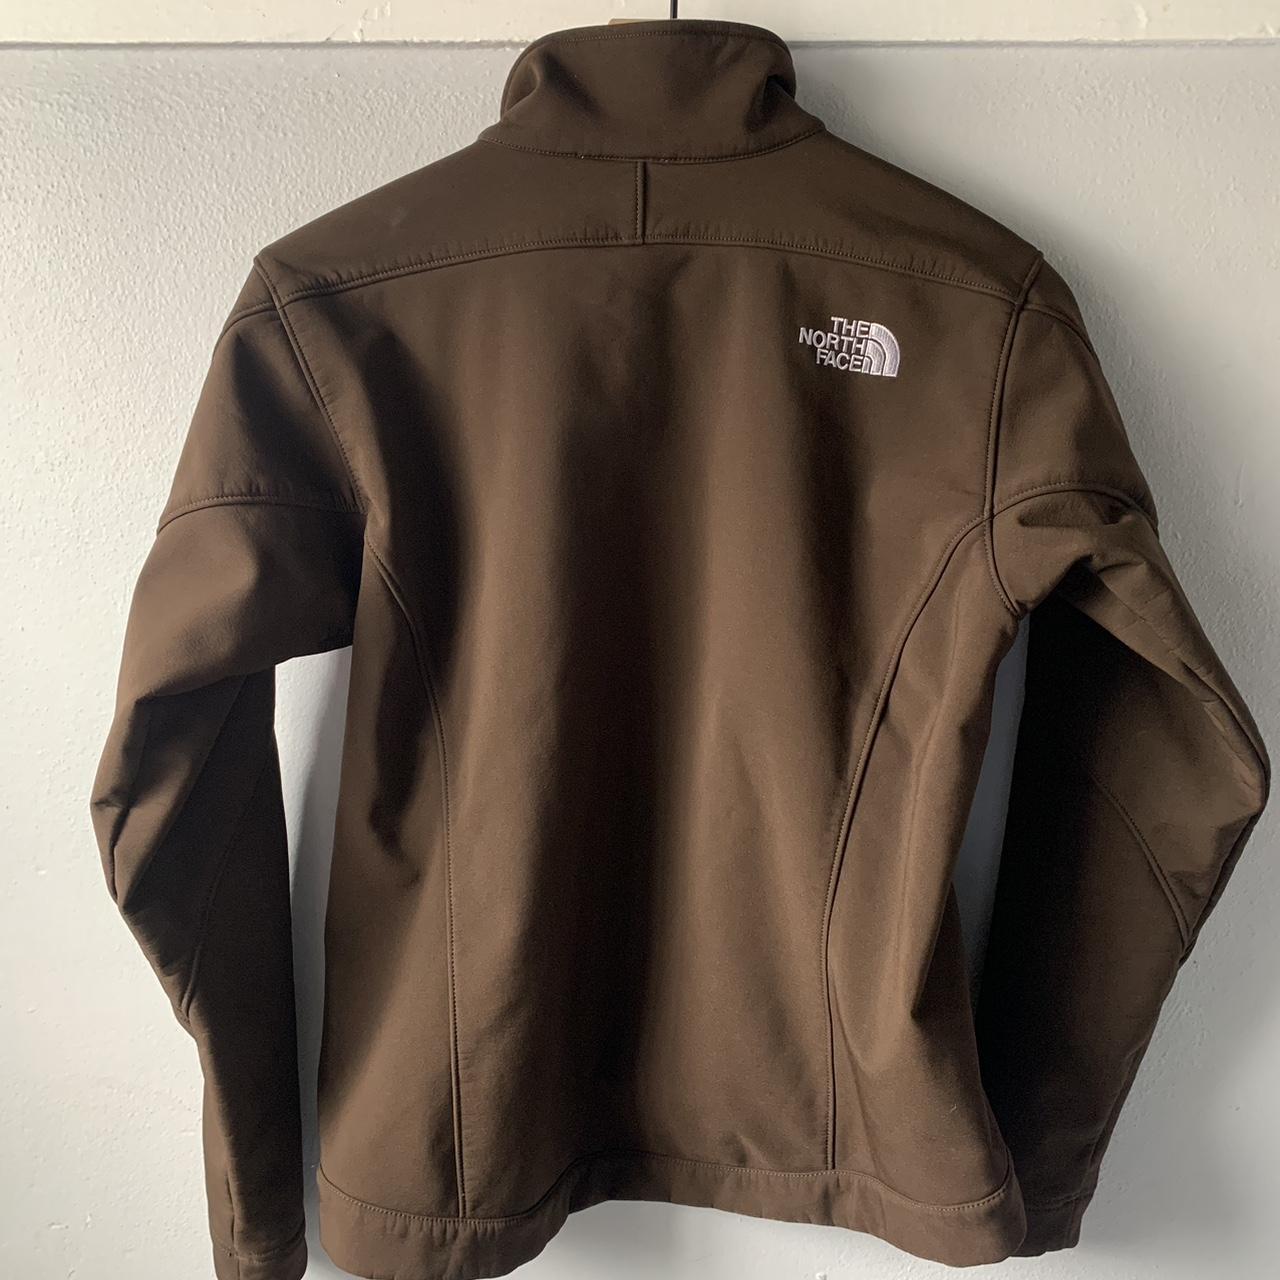 The North Face Women's Brown and White Jacket (3)